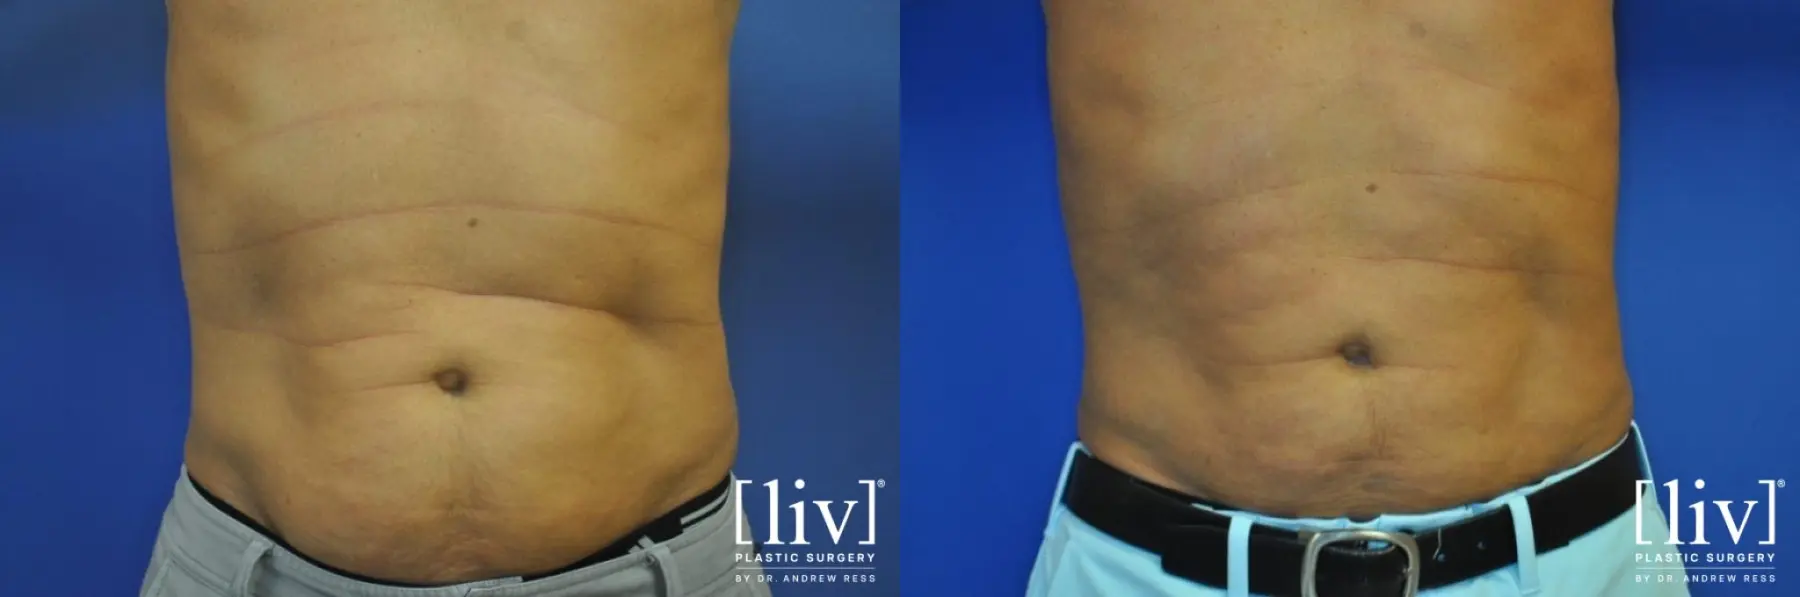 Men Liposuction - Before and After 1